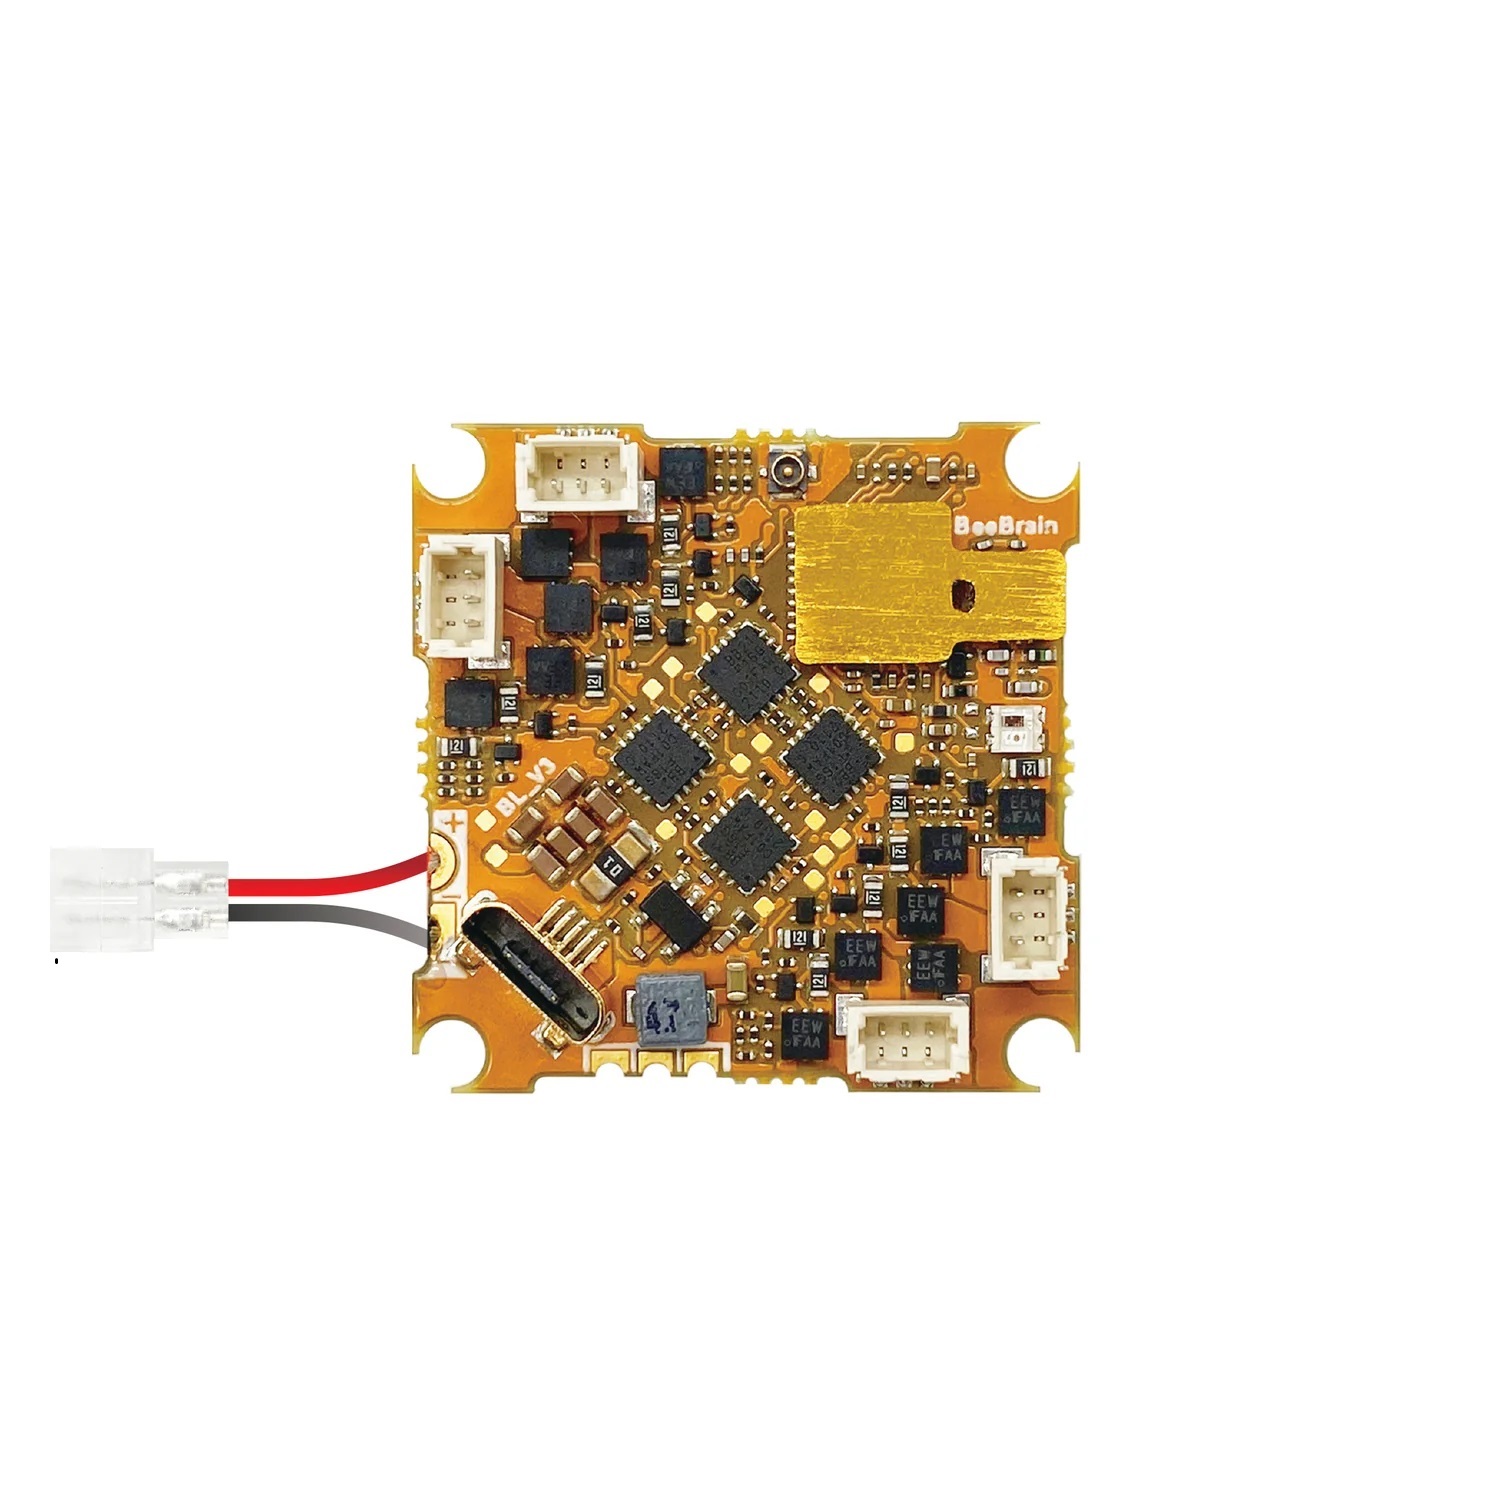 New Bee Drone BeeBrain BLV3 AIO Flight Controller(SPI Frsky)